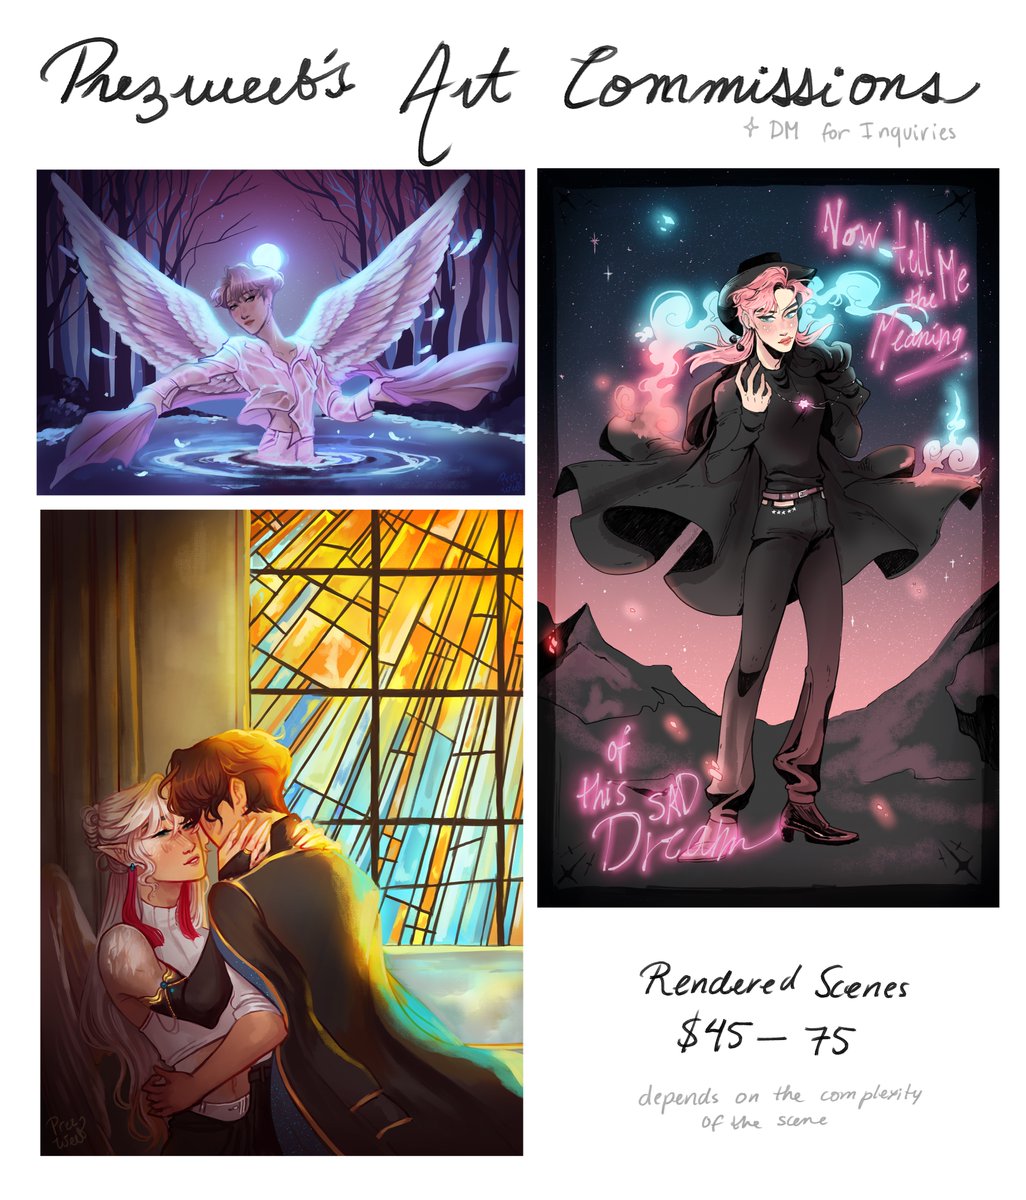 ✨My Commissions Are Open!!✨
- 5 slots open at a time  
- Payment upfront (PayPal)
- + 1/2 of the original price per extra character
- Dm me for more info! 